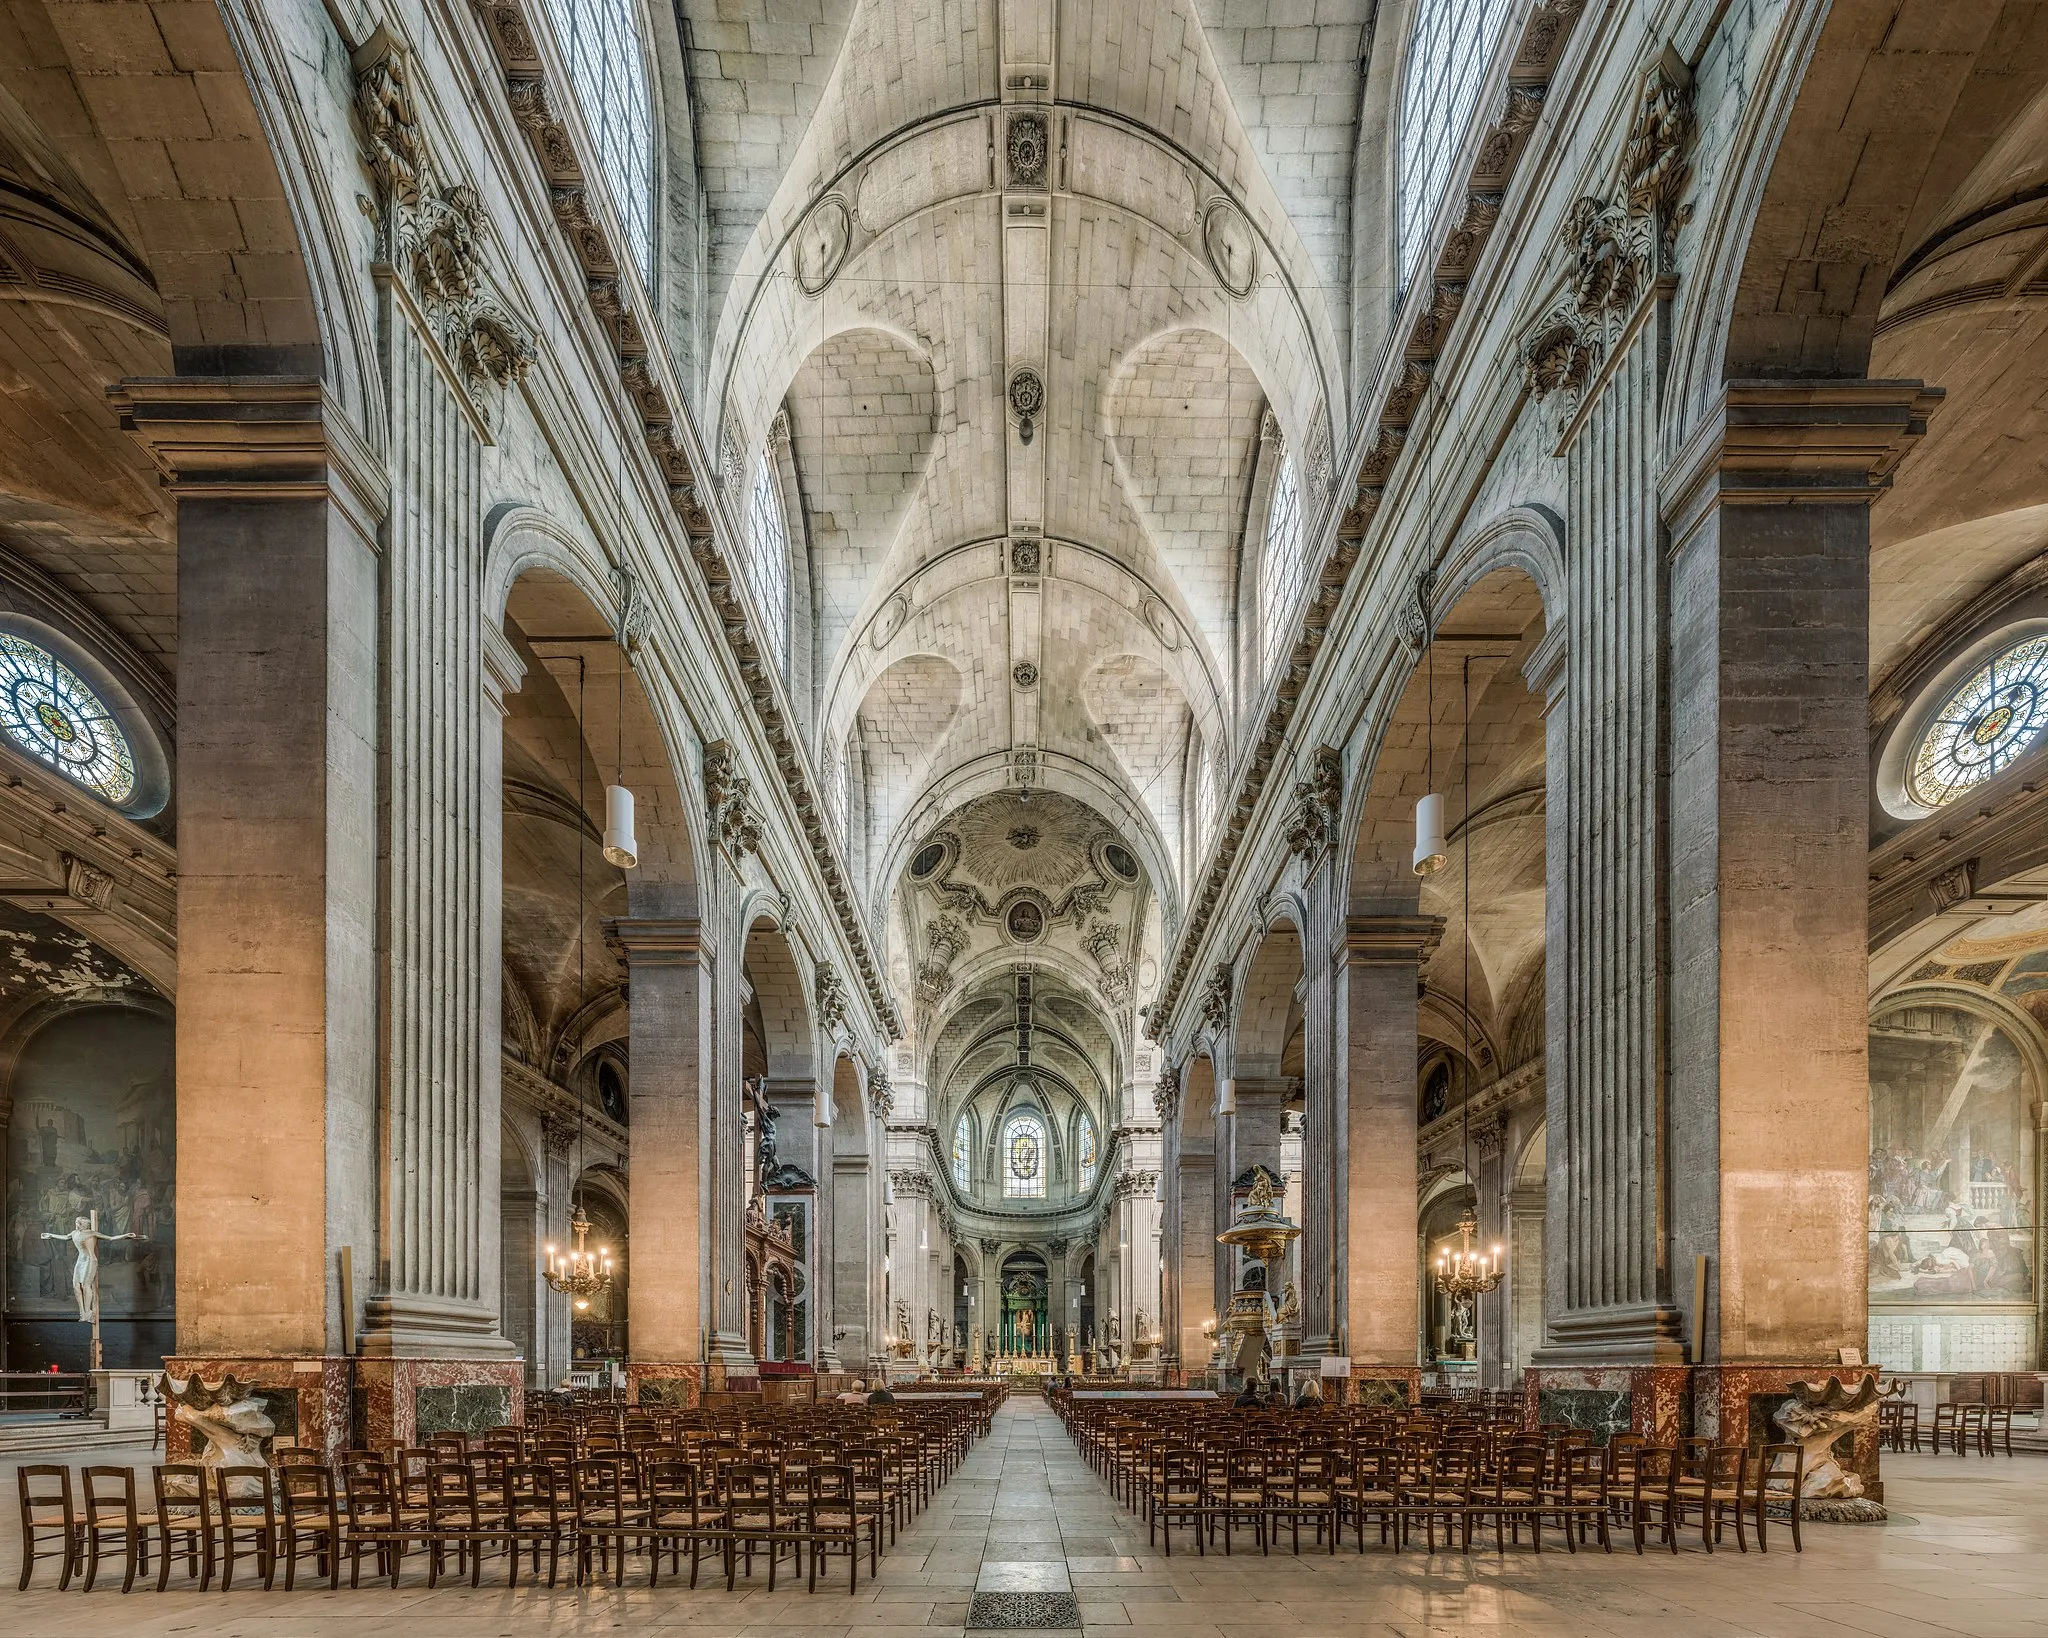 Photo showing: The nave of the Saint-Sulpice church in Paris, France.